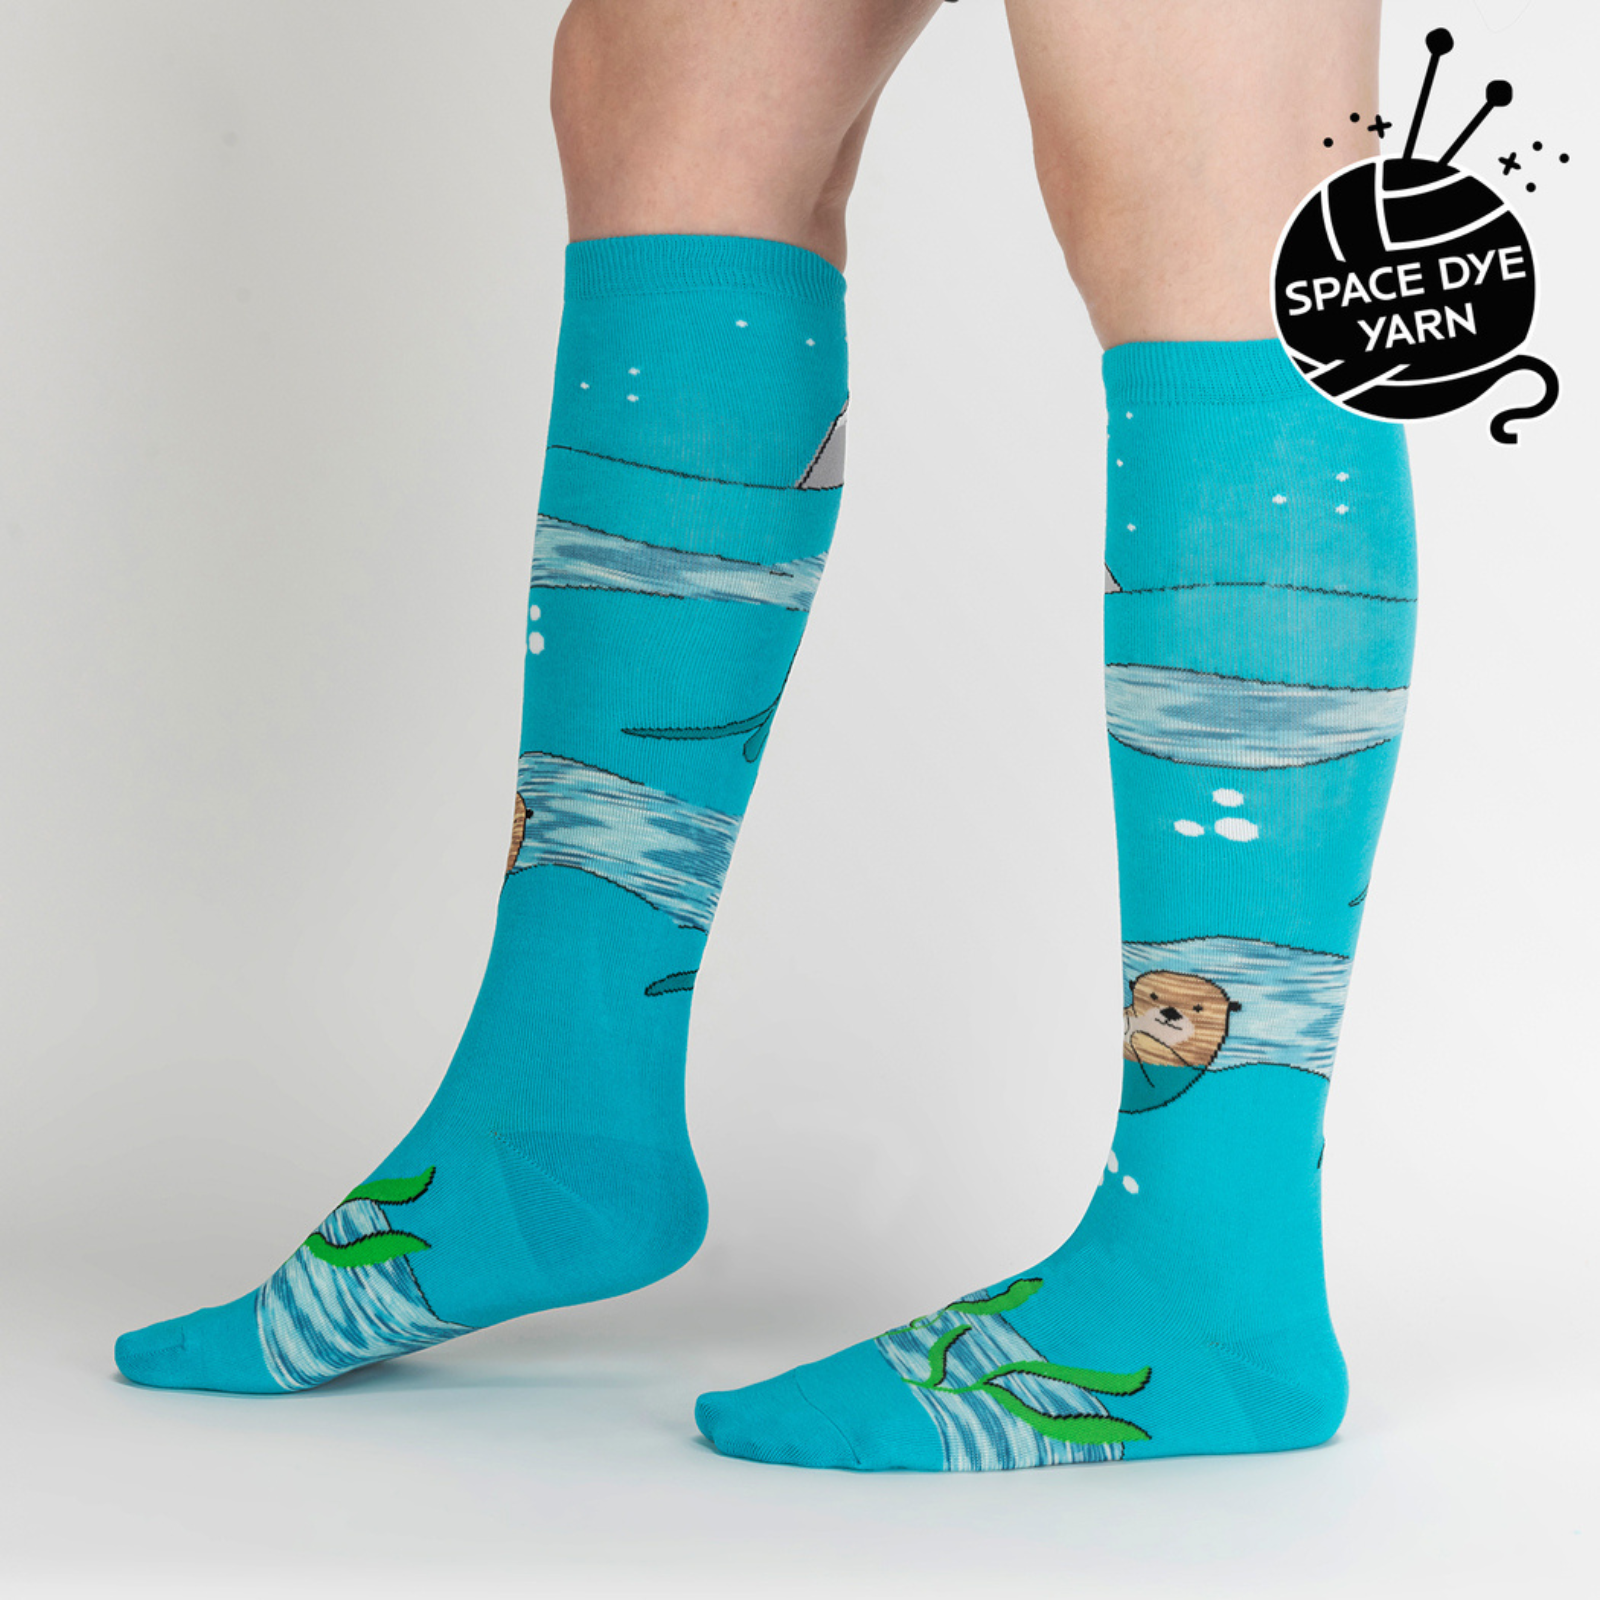 Sock It To Me Plays Well With Otters women's sock featuring blue knee high with otters and a puffin bird on model seen from side